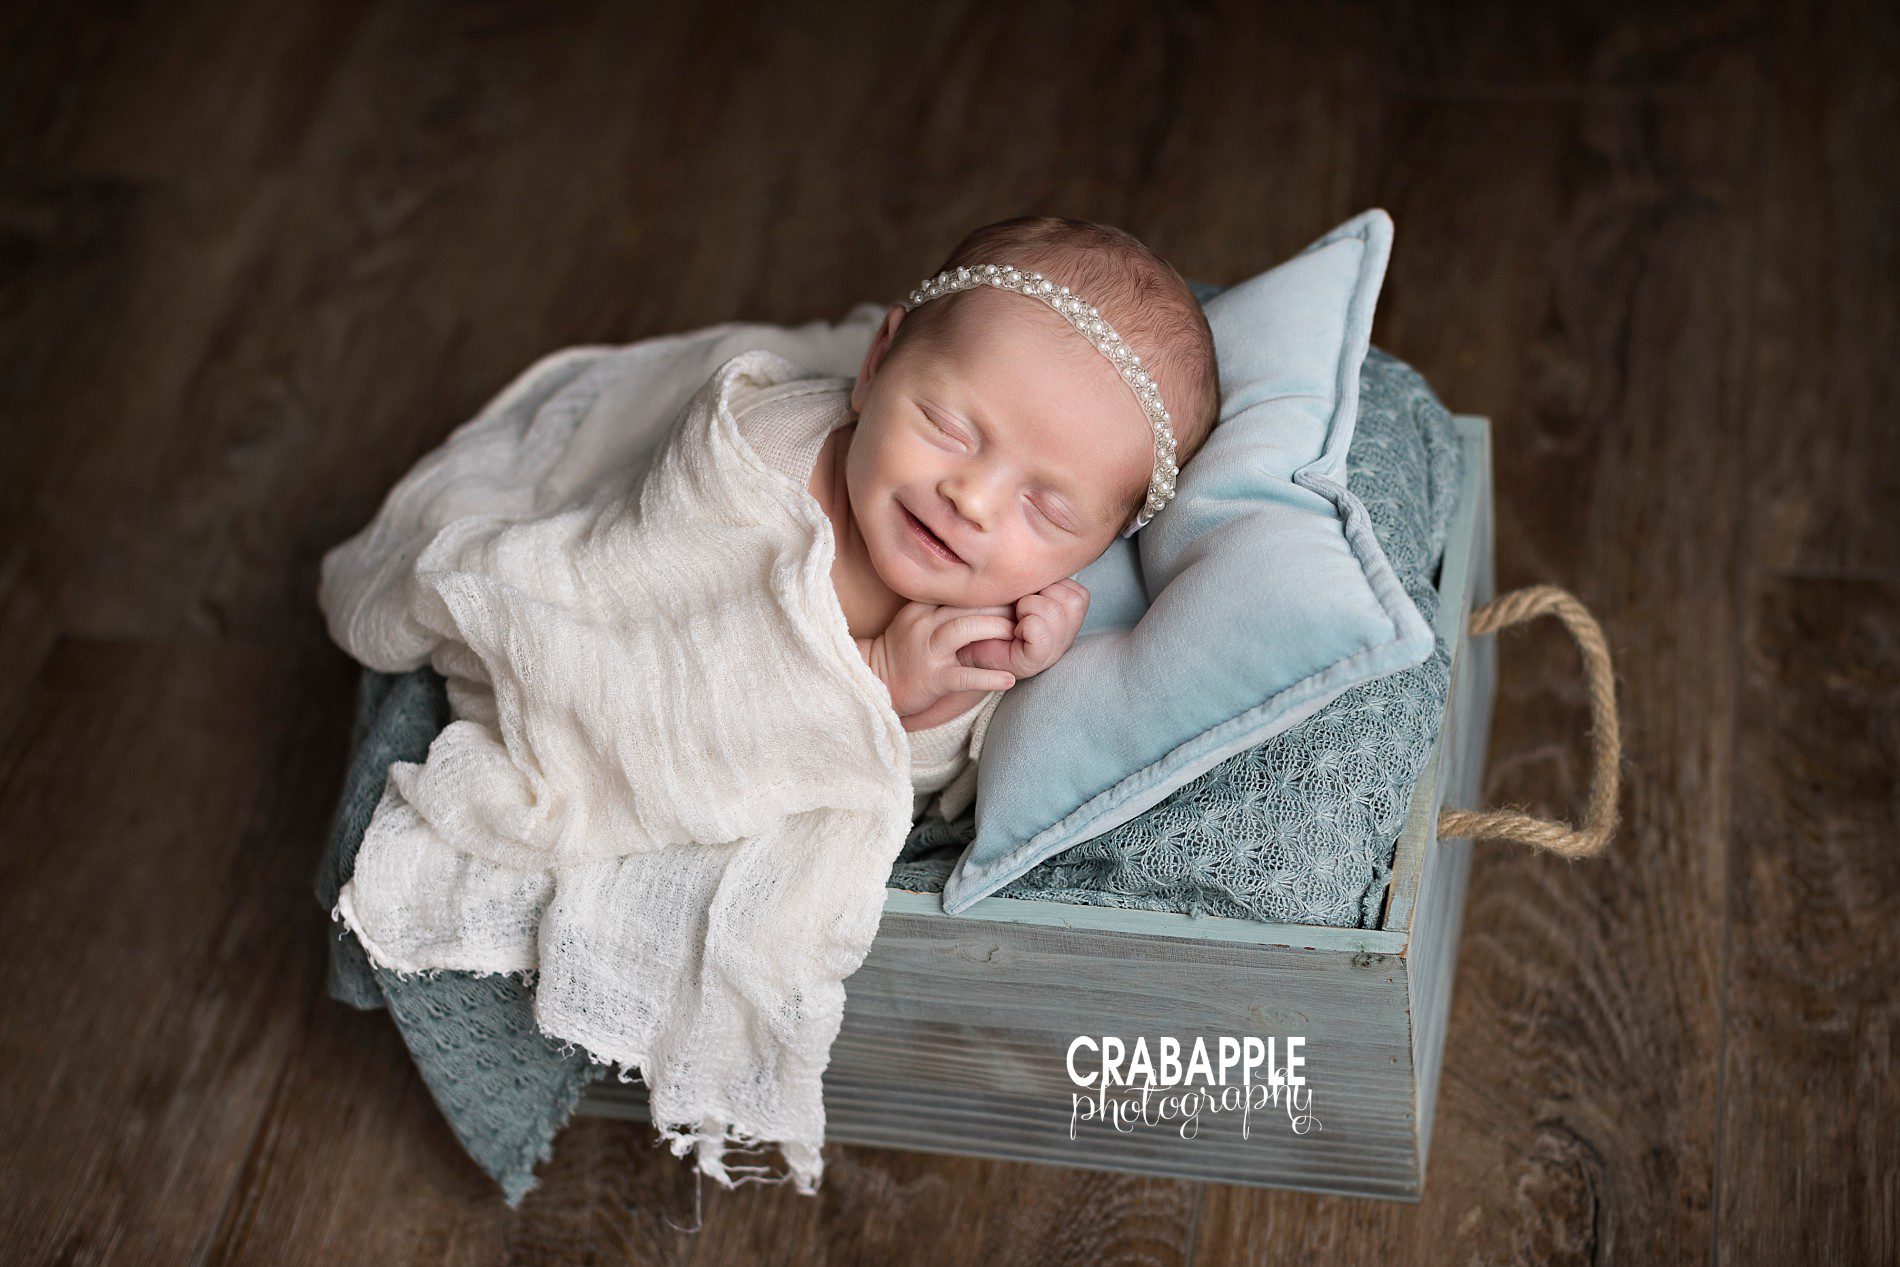 pose and prop ideas for newborn portraits